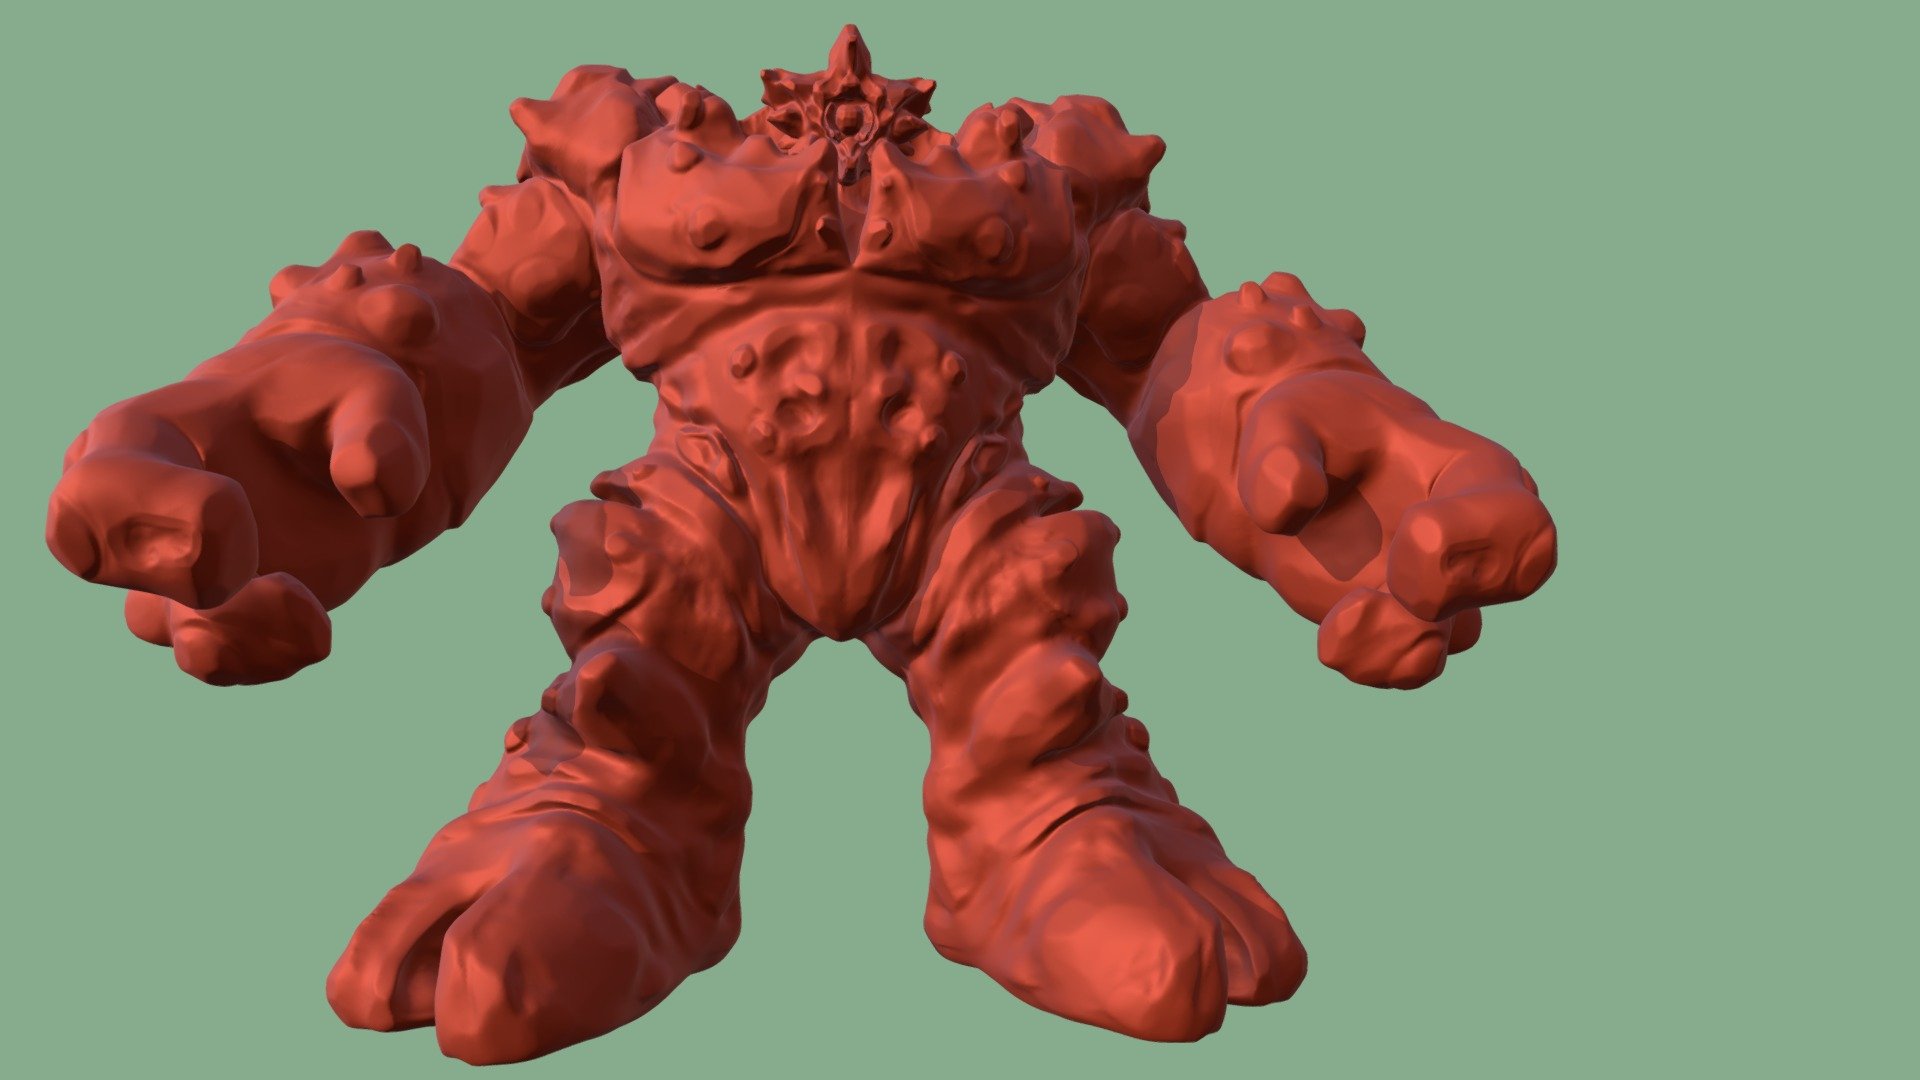 Falling from space to land on Earth for yet another resculpt - Meteor Monster - 3D model by Mr Jay (@mrjay) 3d model